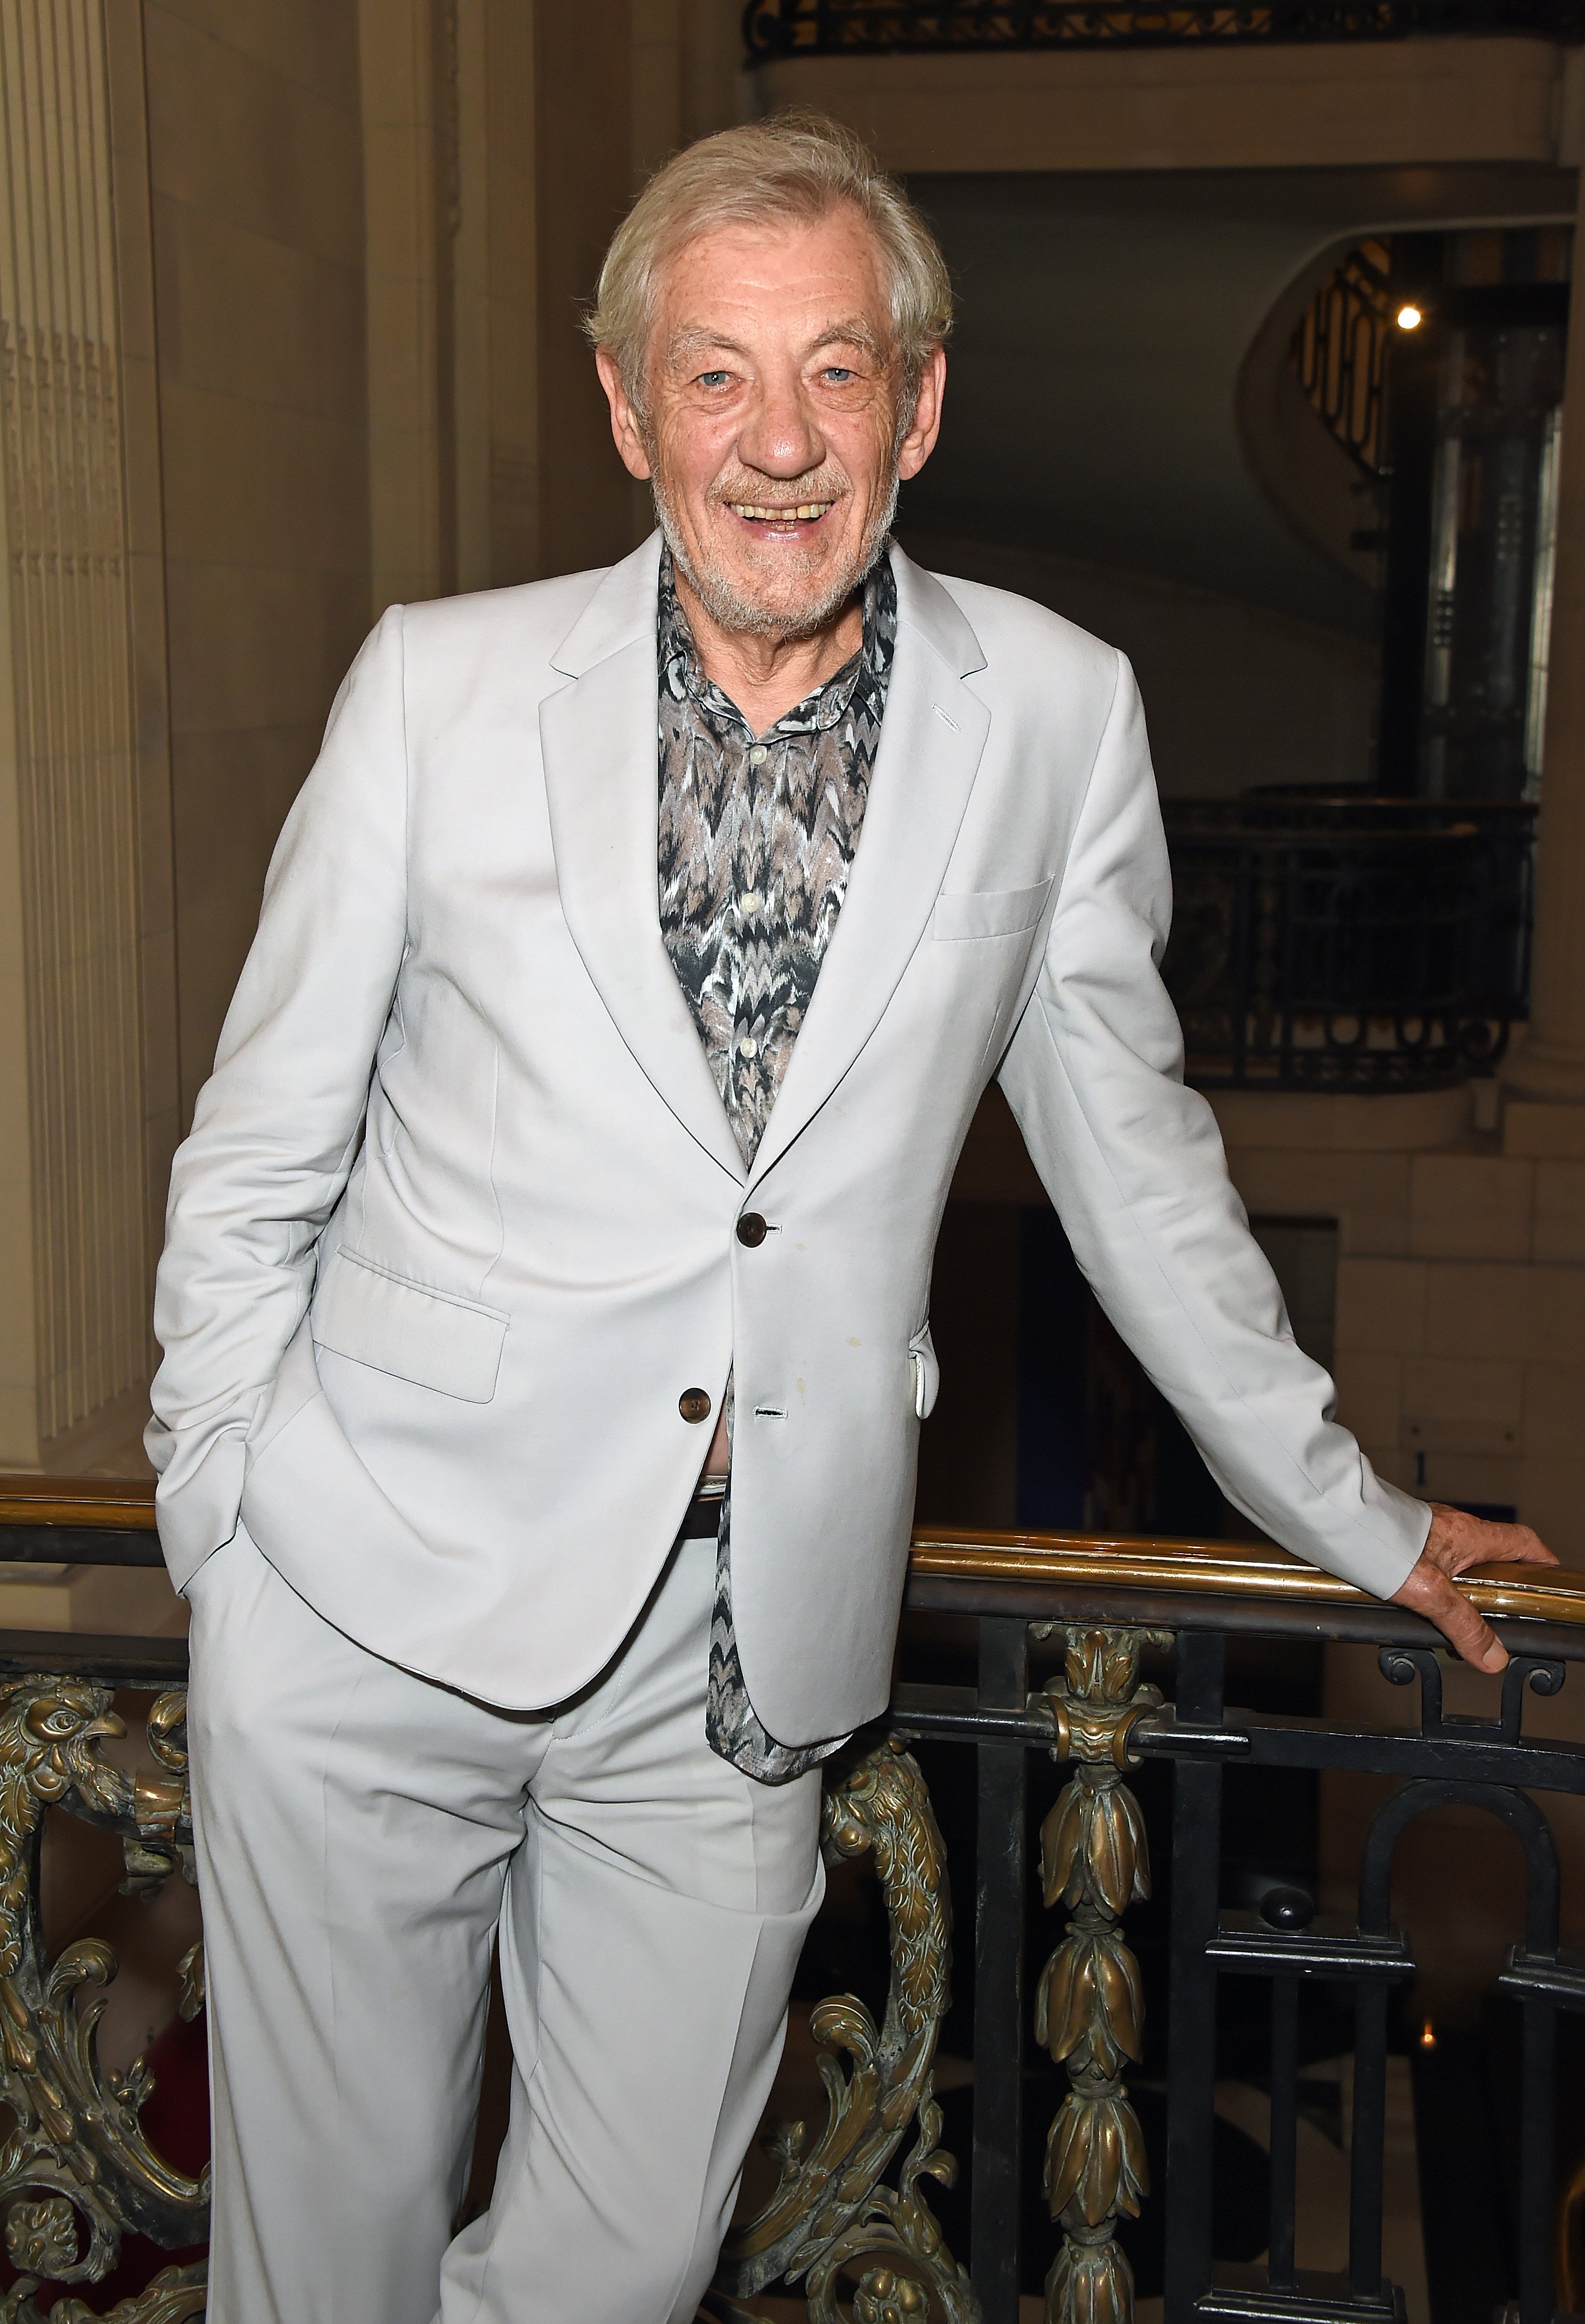 Ian McKellen attends an after paty for "King Lear" in London, England on July 26, 2018 | Photo: Getty Images